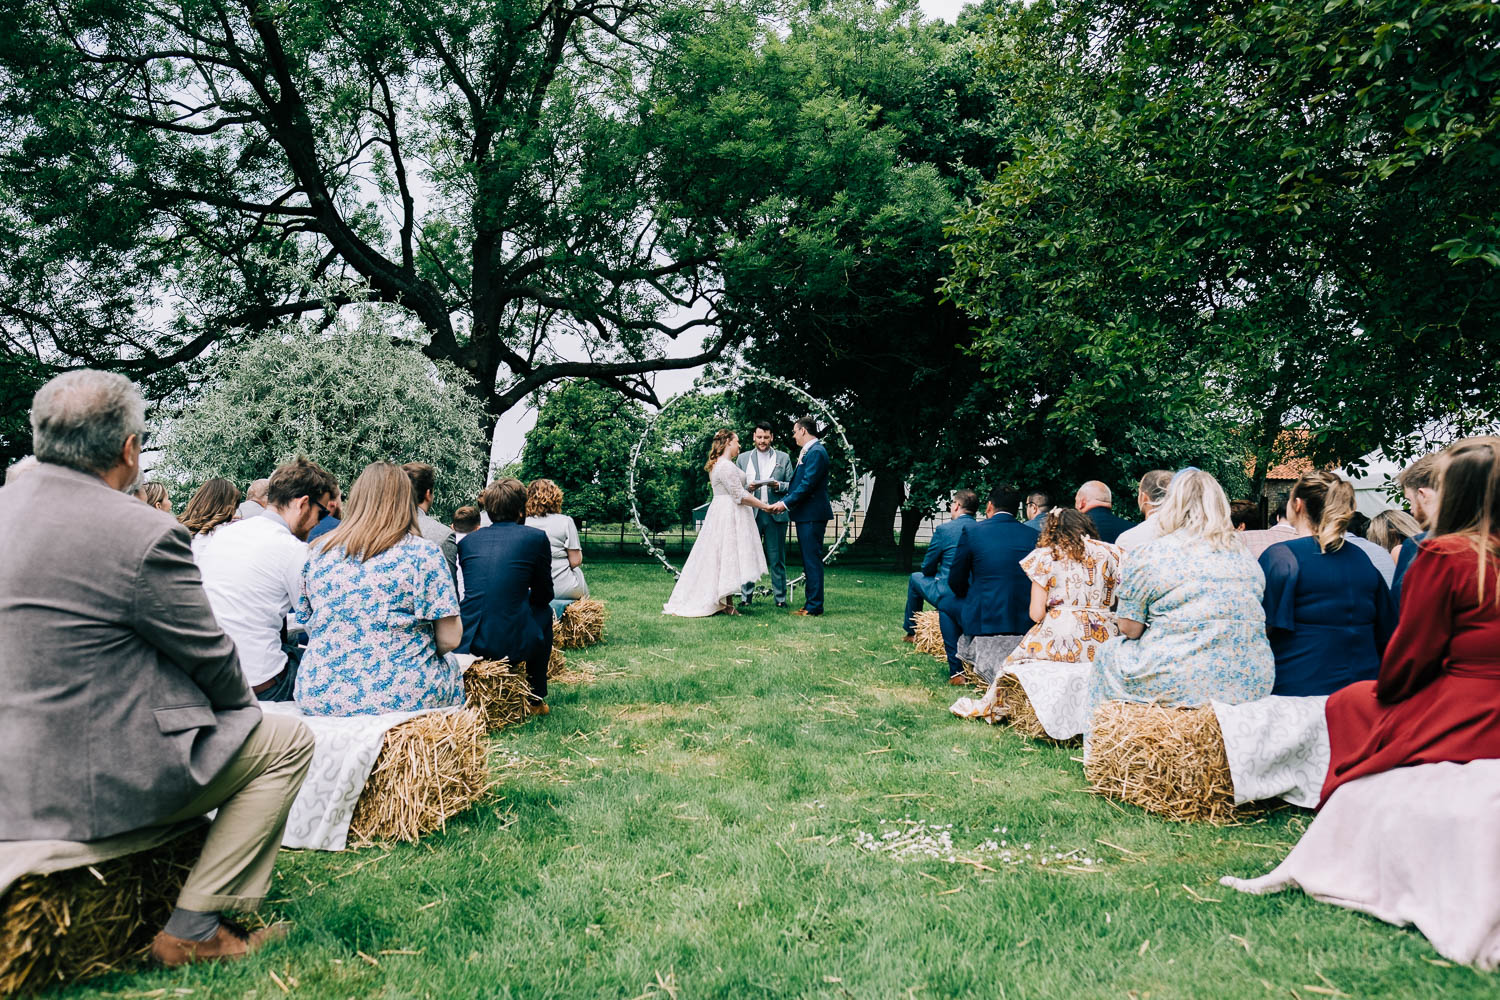 Boho style whimsical wedding on a lawn with guests seated on hay bales. By Lincolnshire wedding photographer 166 Photography